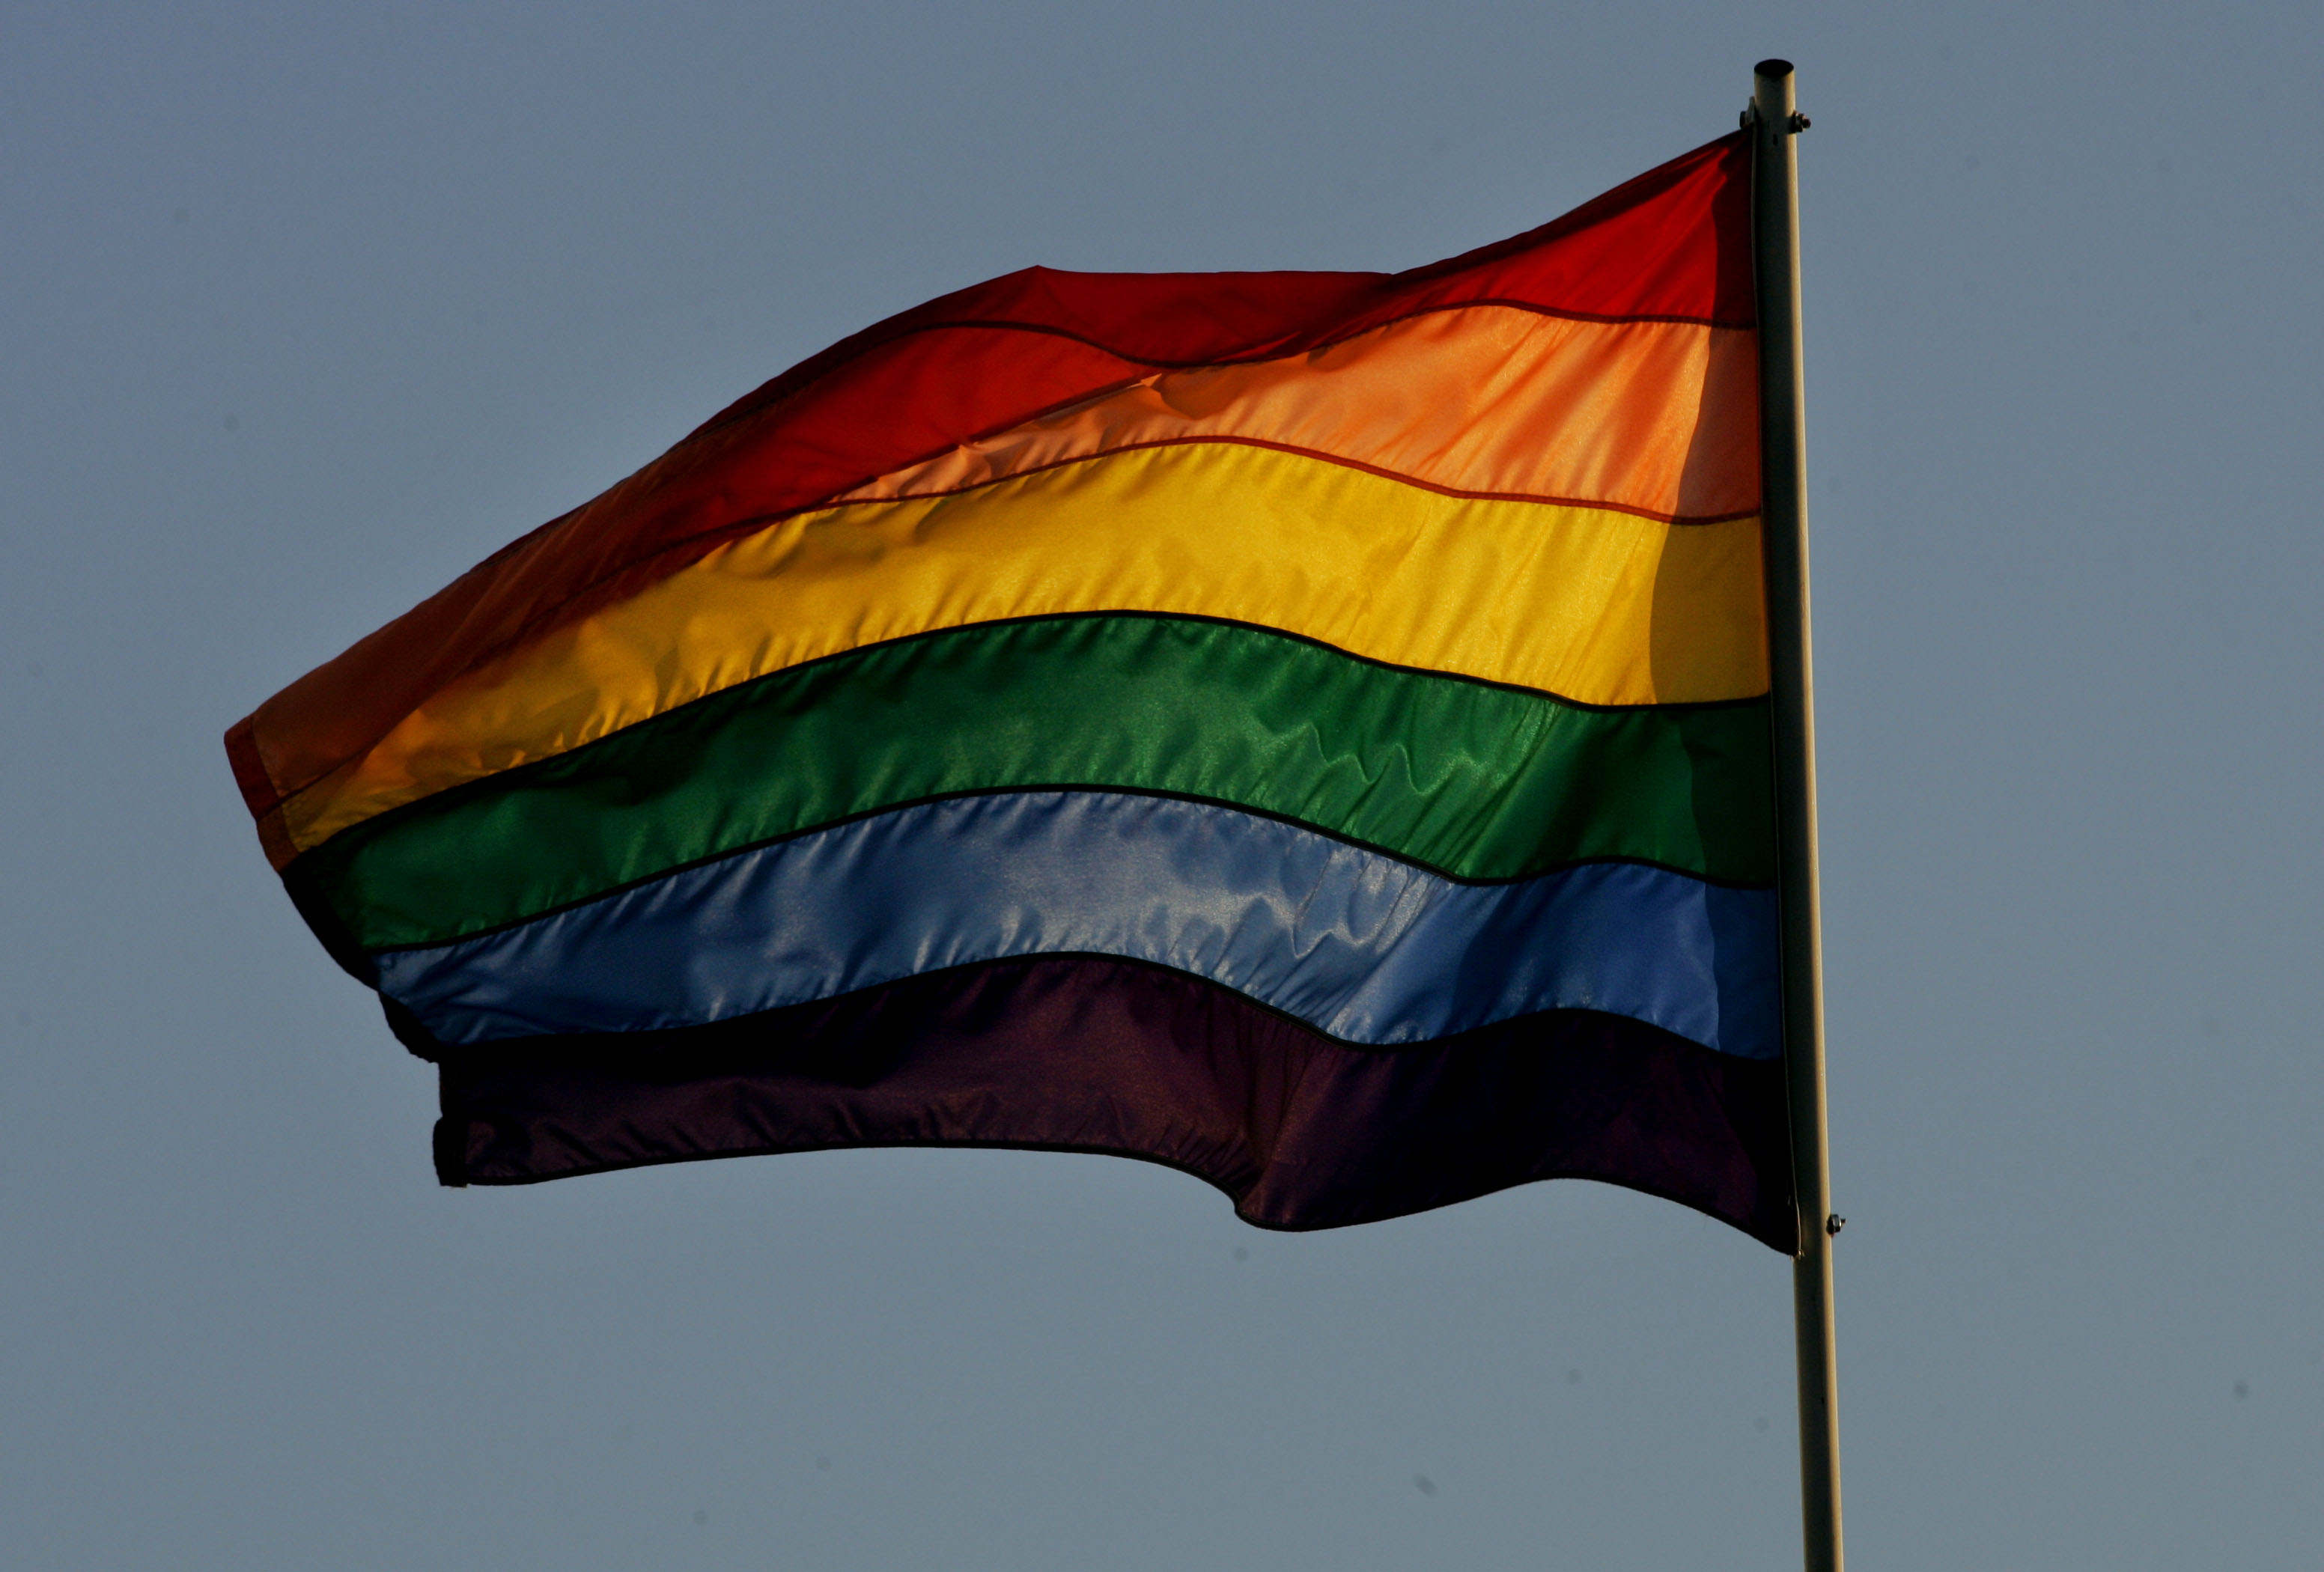 SAN DIEGO, CA - NOVEMBER 5: A Rainbow flag flies above the San Diego Lesbian Gay Bisexual Transgender Community Center November 5, 2008 in San Diego, California. Proposition 8, which bans same sex marriage, passed in yesterday's Calfironia election. (Photo by Sandy Huffaker/Getty Images)